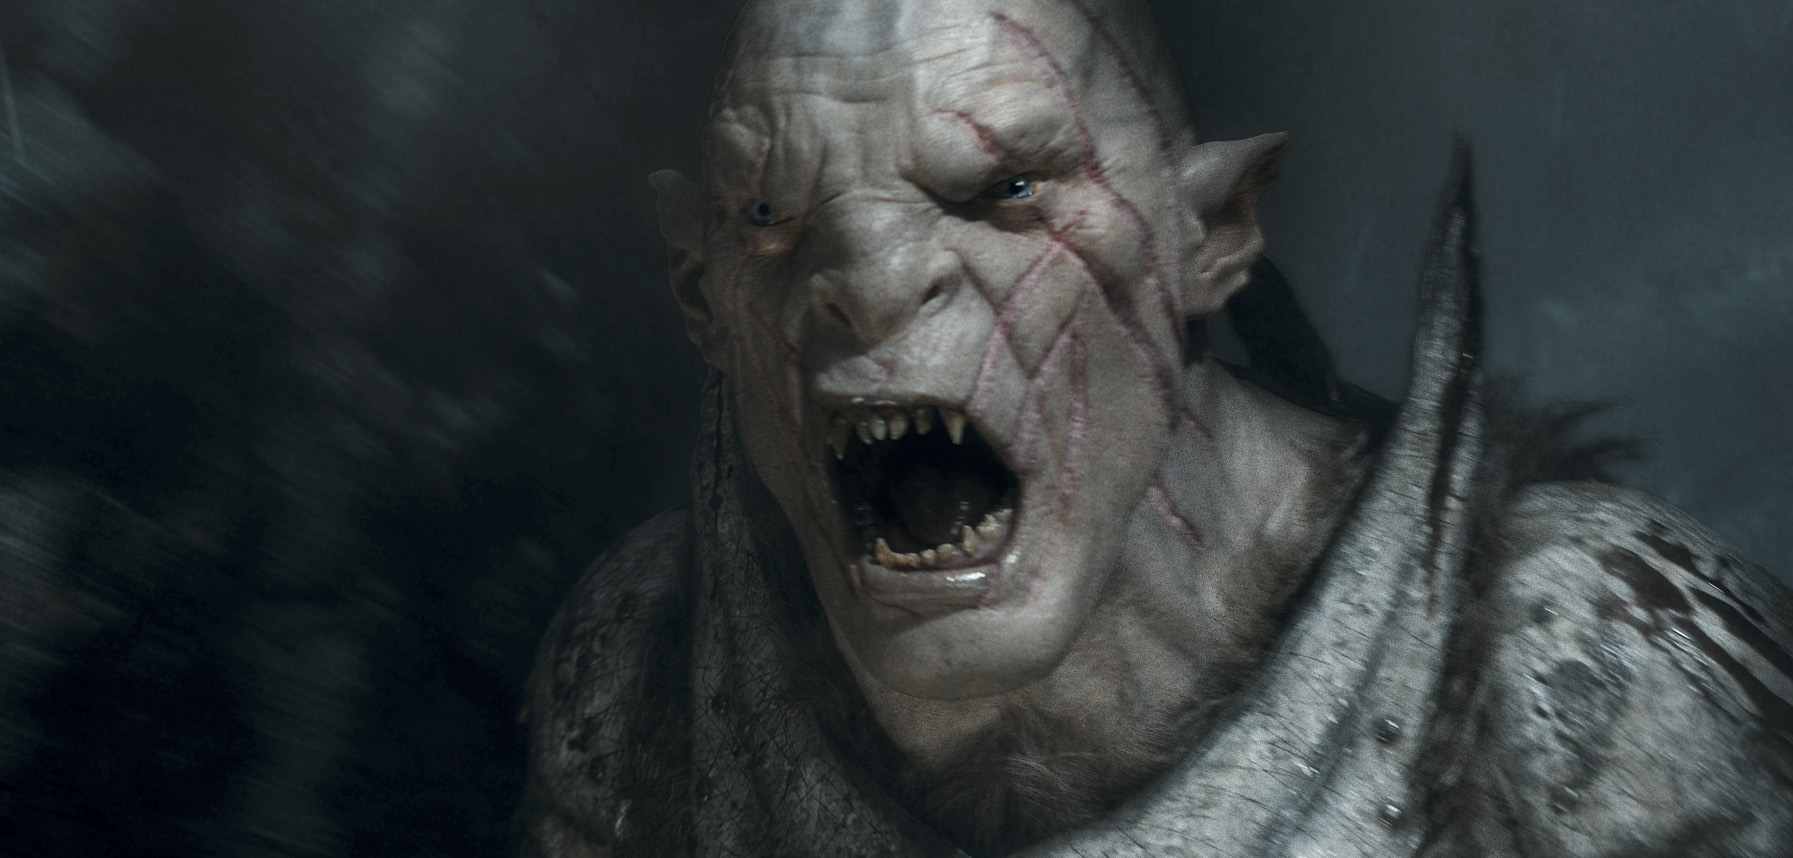 Azog is back to meet his just dessert on the battlefield.